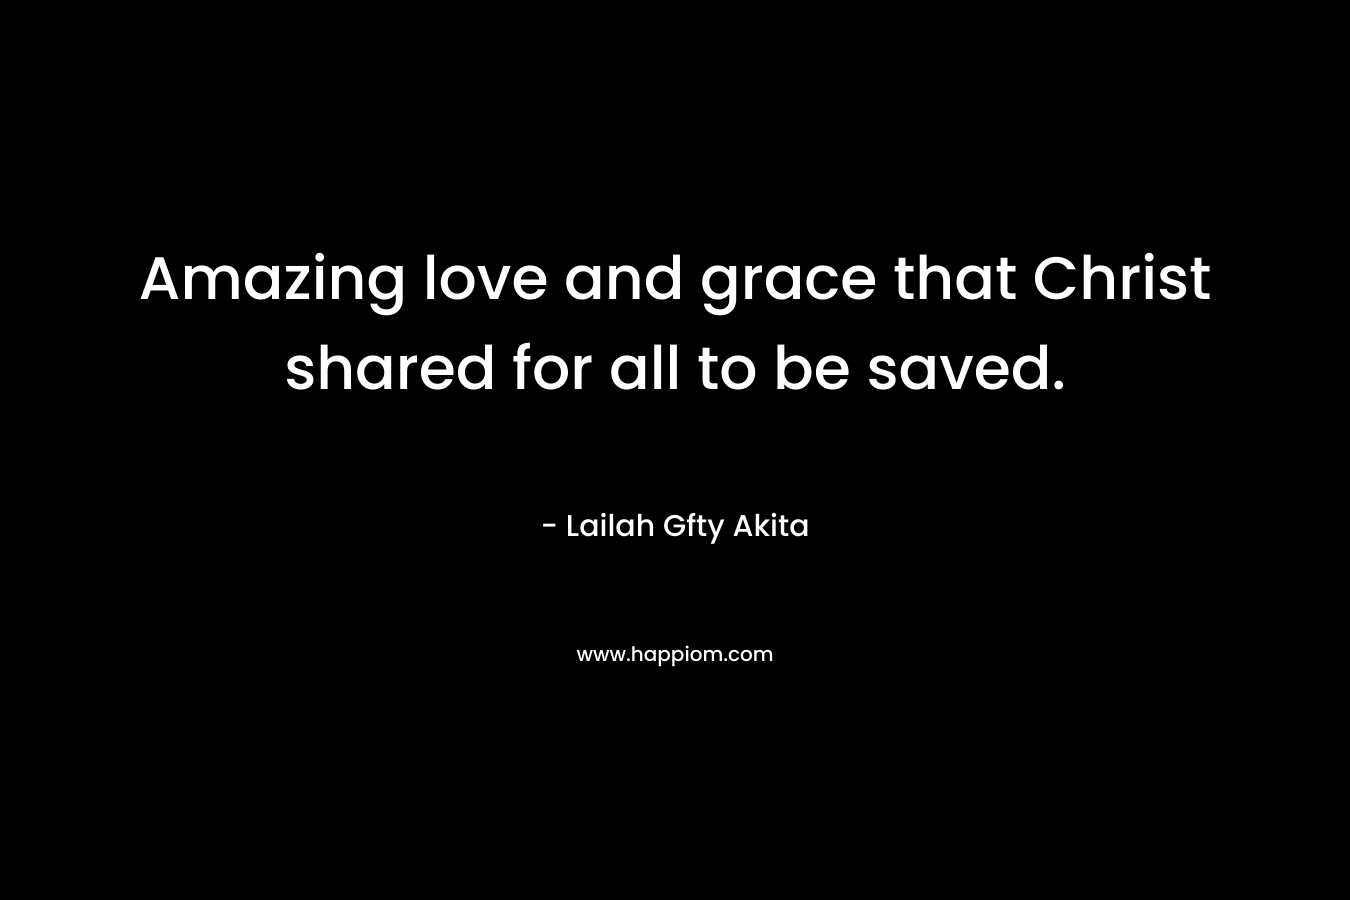 Amazing love and grace that Christ shared for all to be saved.